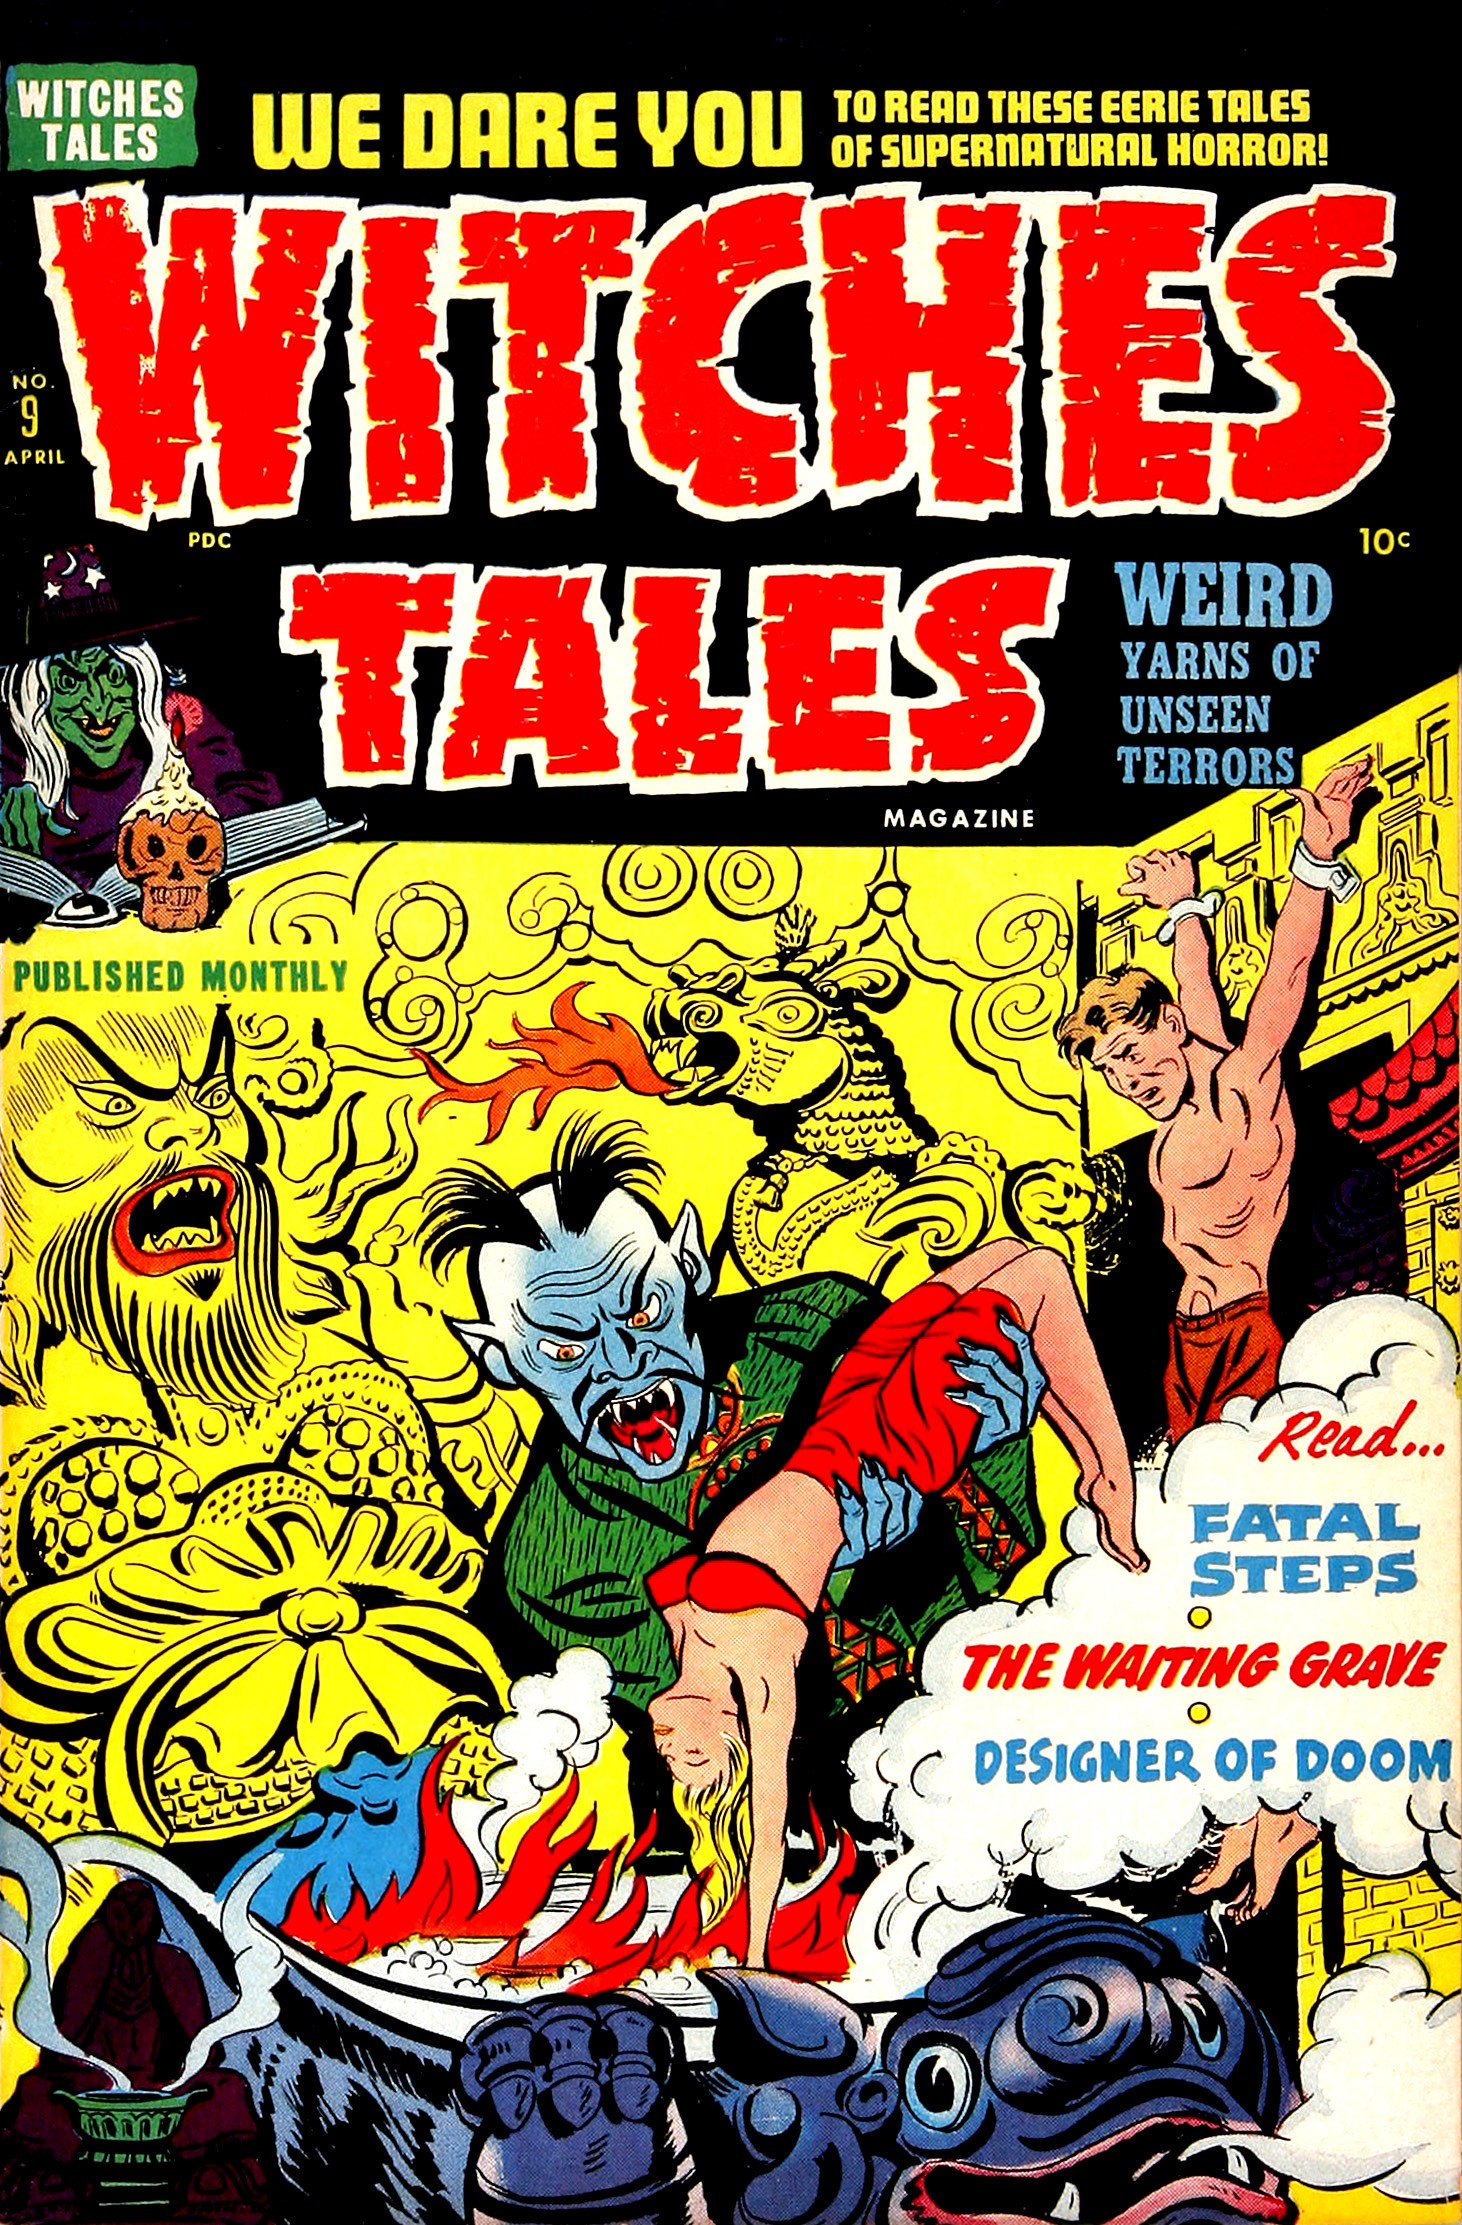 Witches Tales #9, Al Avison Cover (Harvey, 1952)